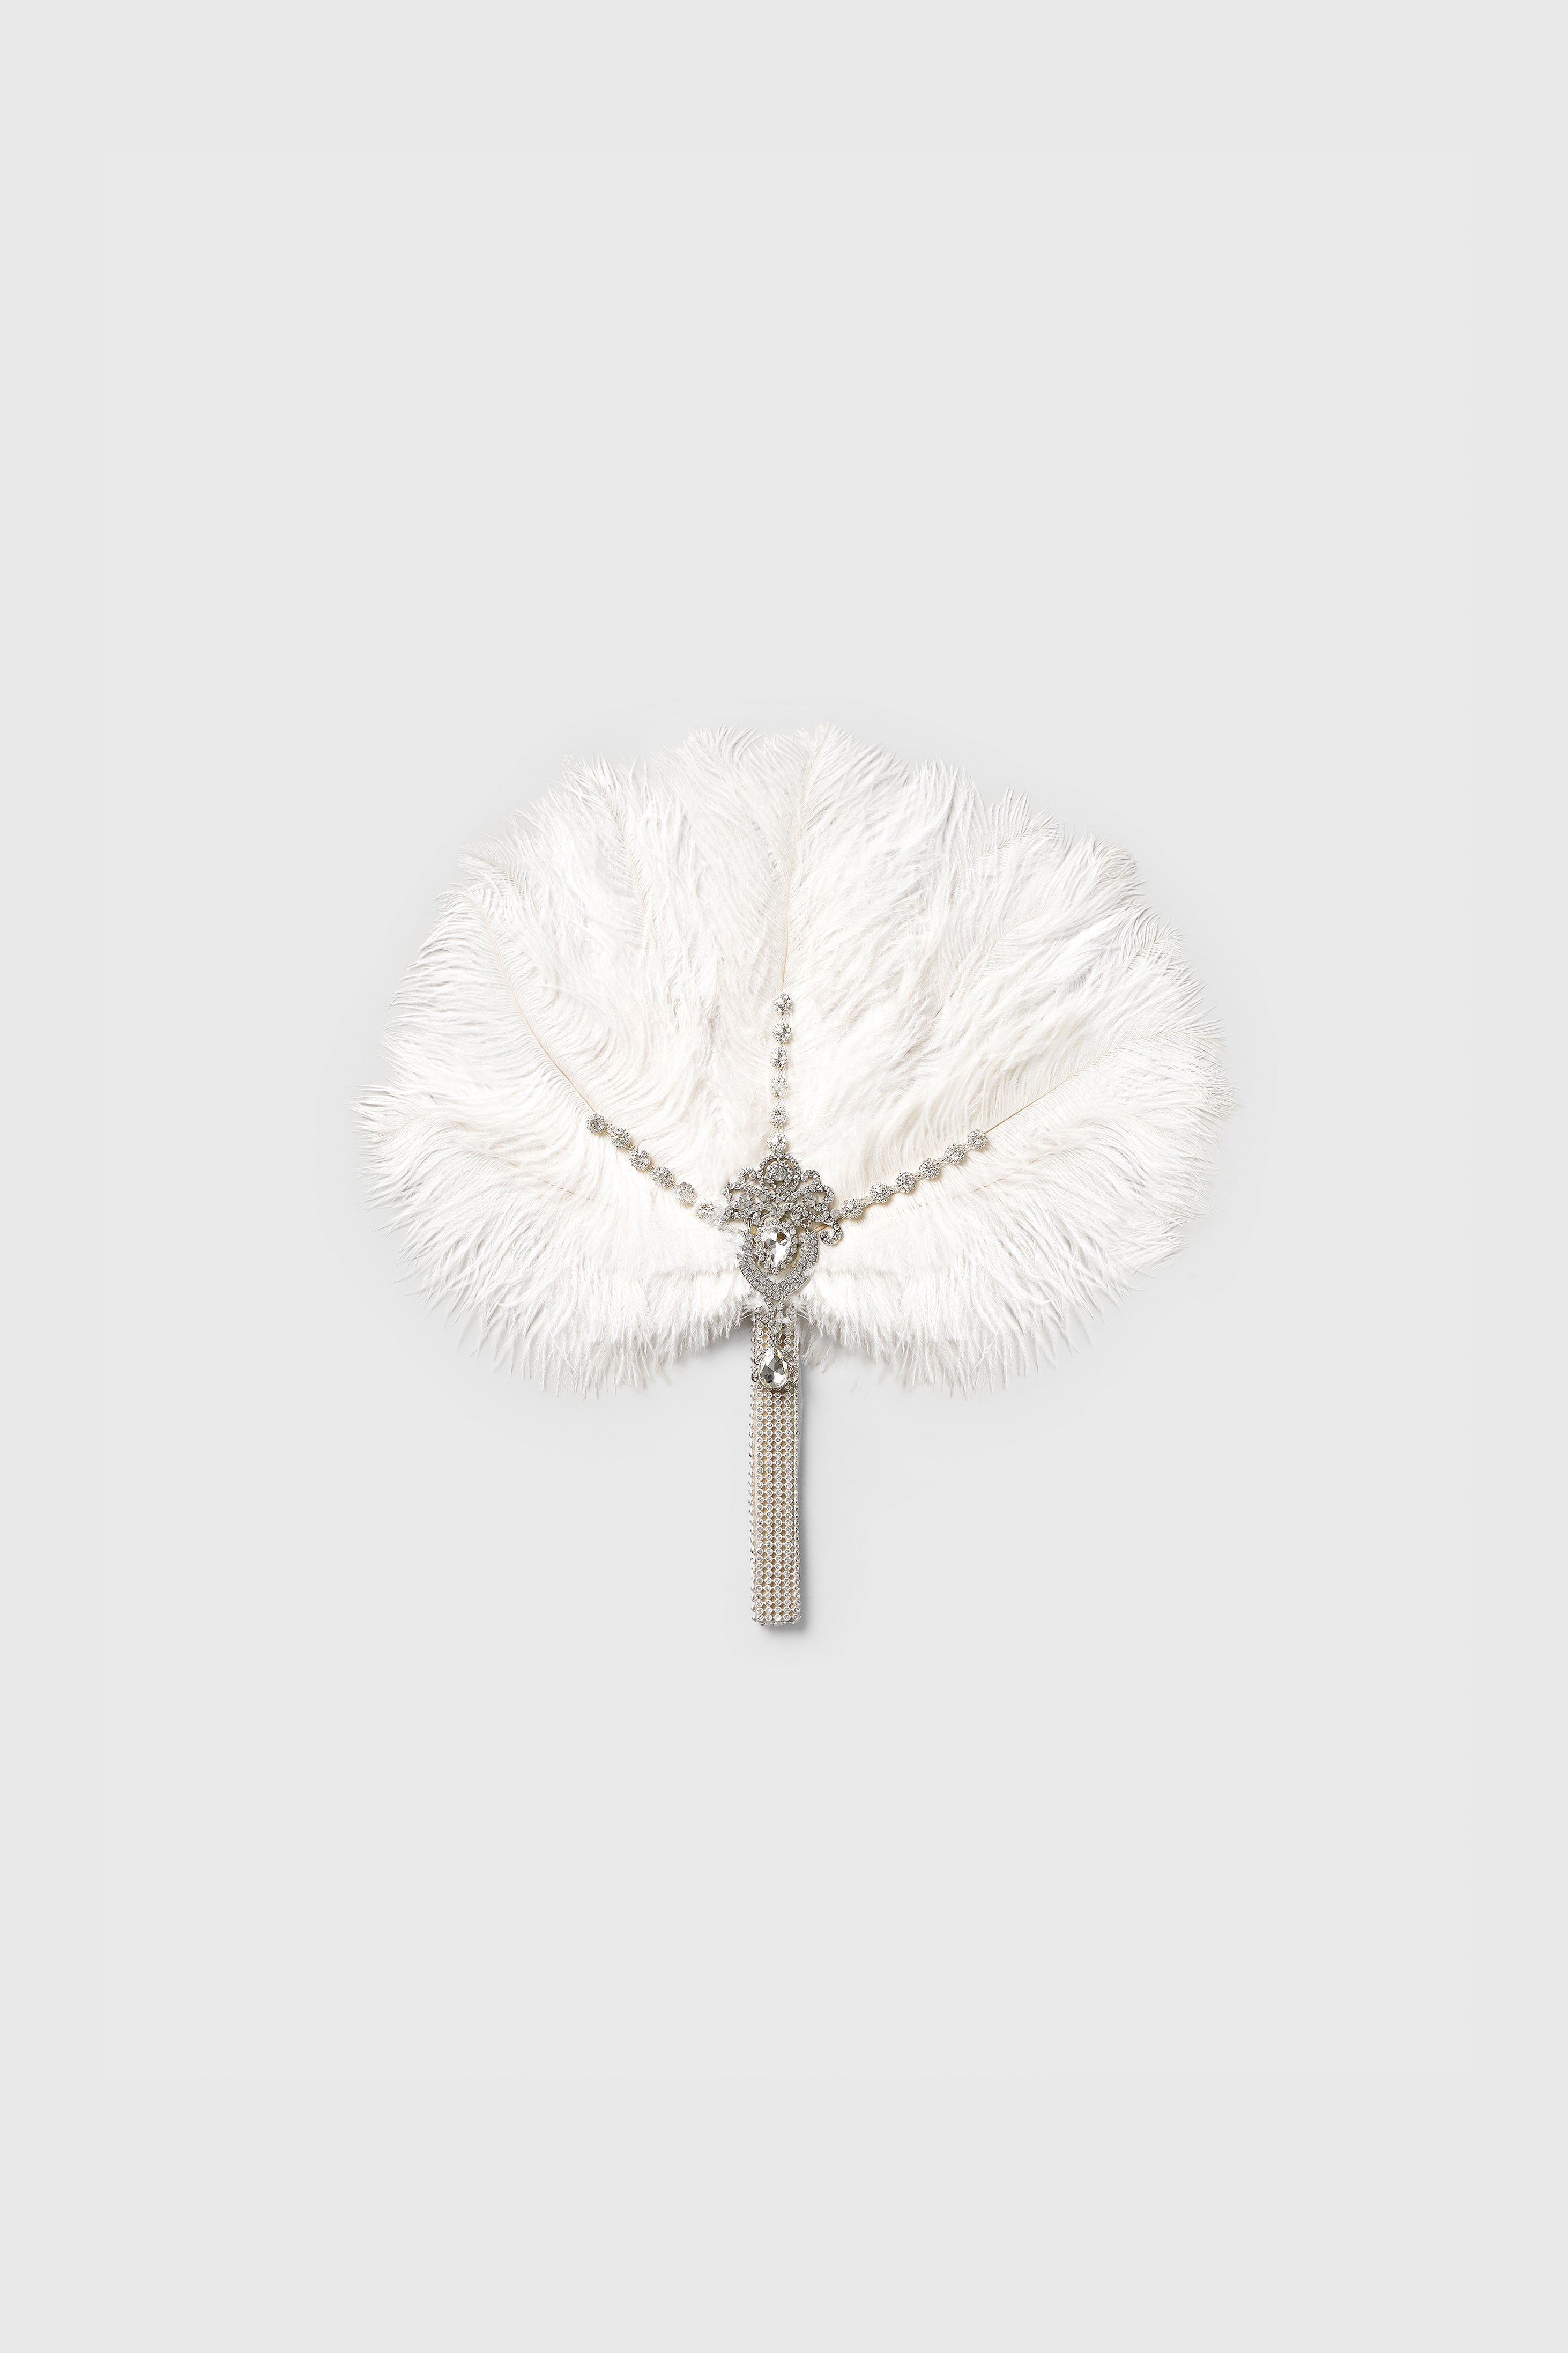 1920s Vintage Feather Feather Fan